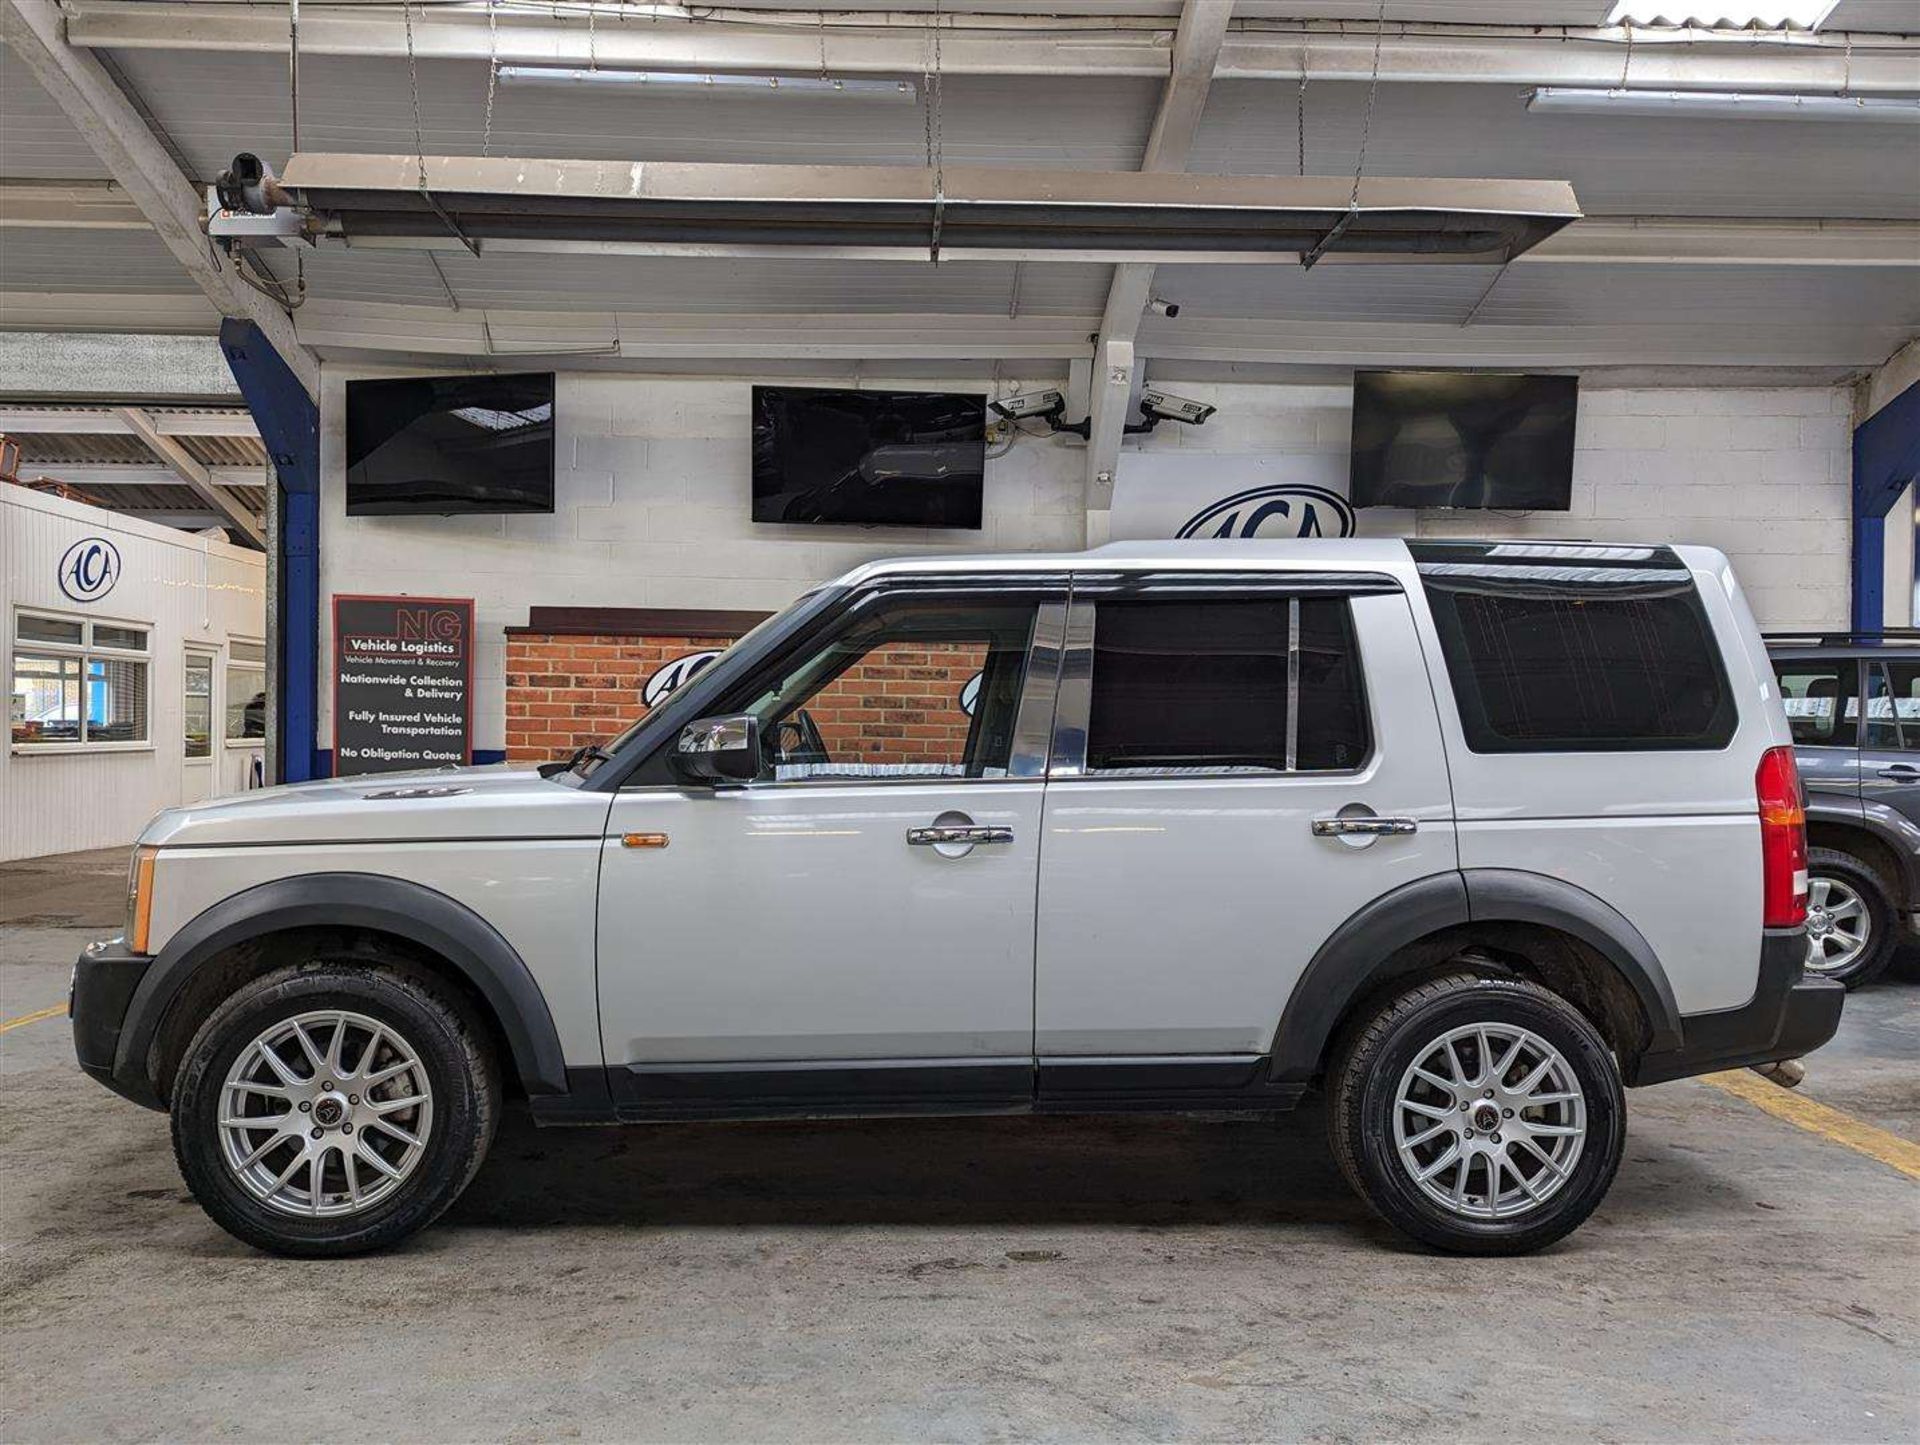 2005 LAND ROVER DISCOVERY 3 TDV6 S AUTO - Image 2 of 30